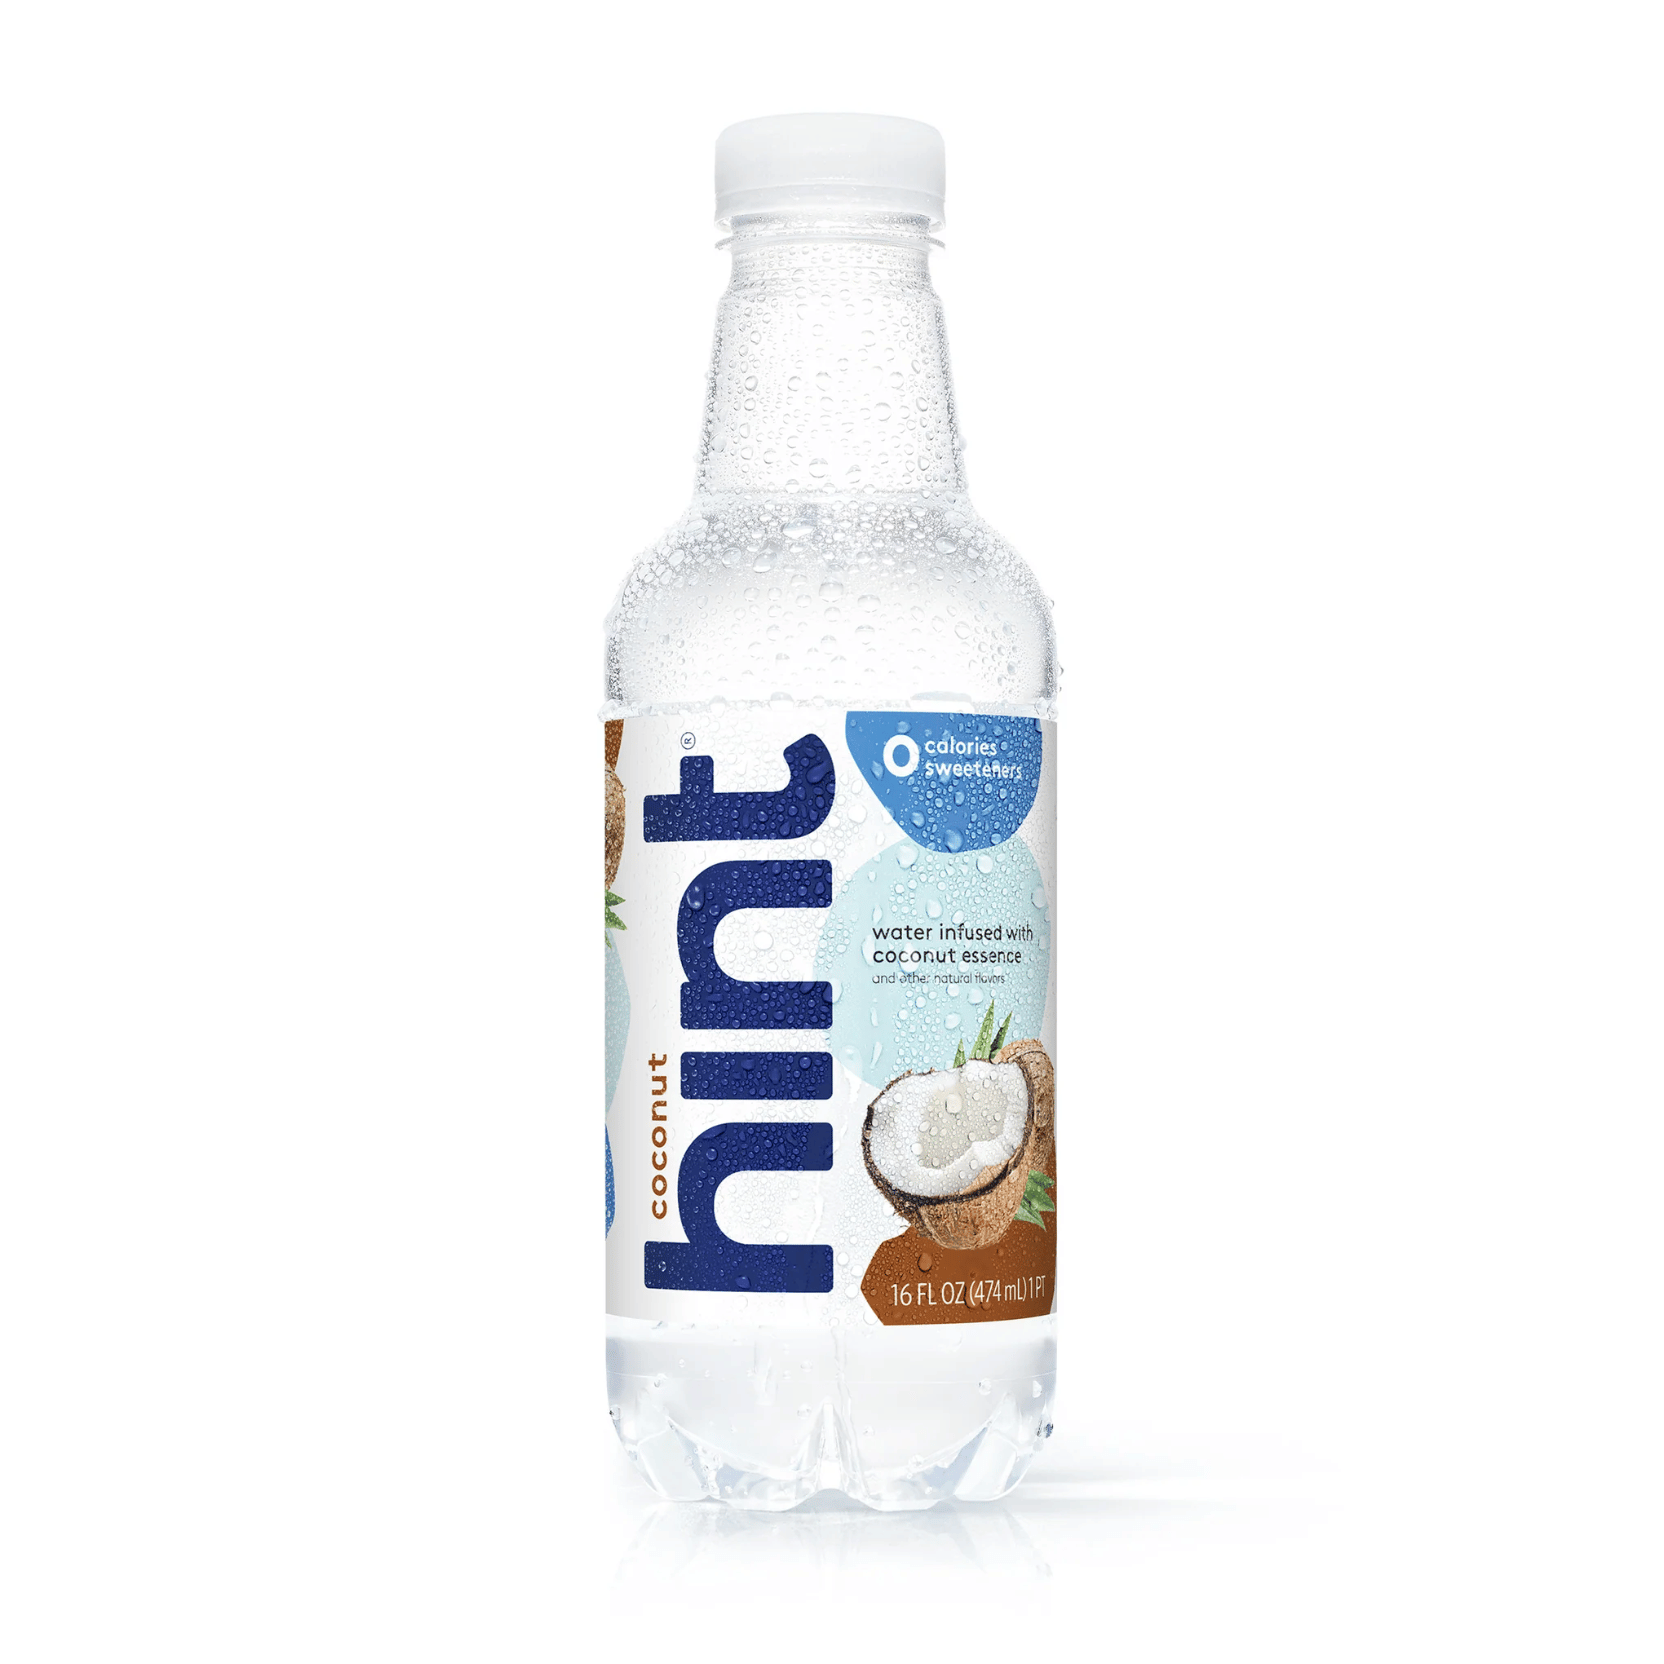 I've started drinking 40oz of water daily since joining this sub